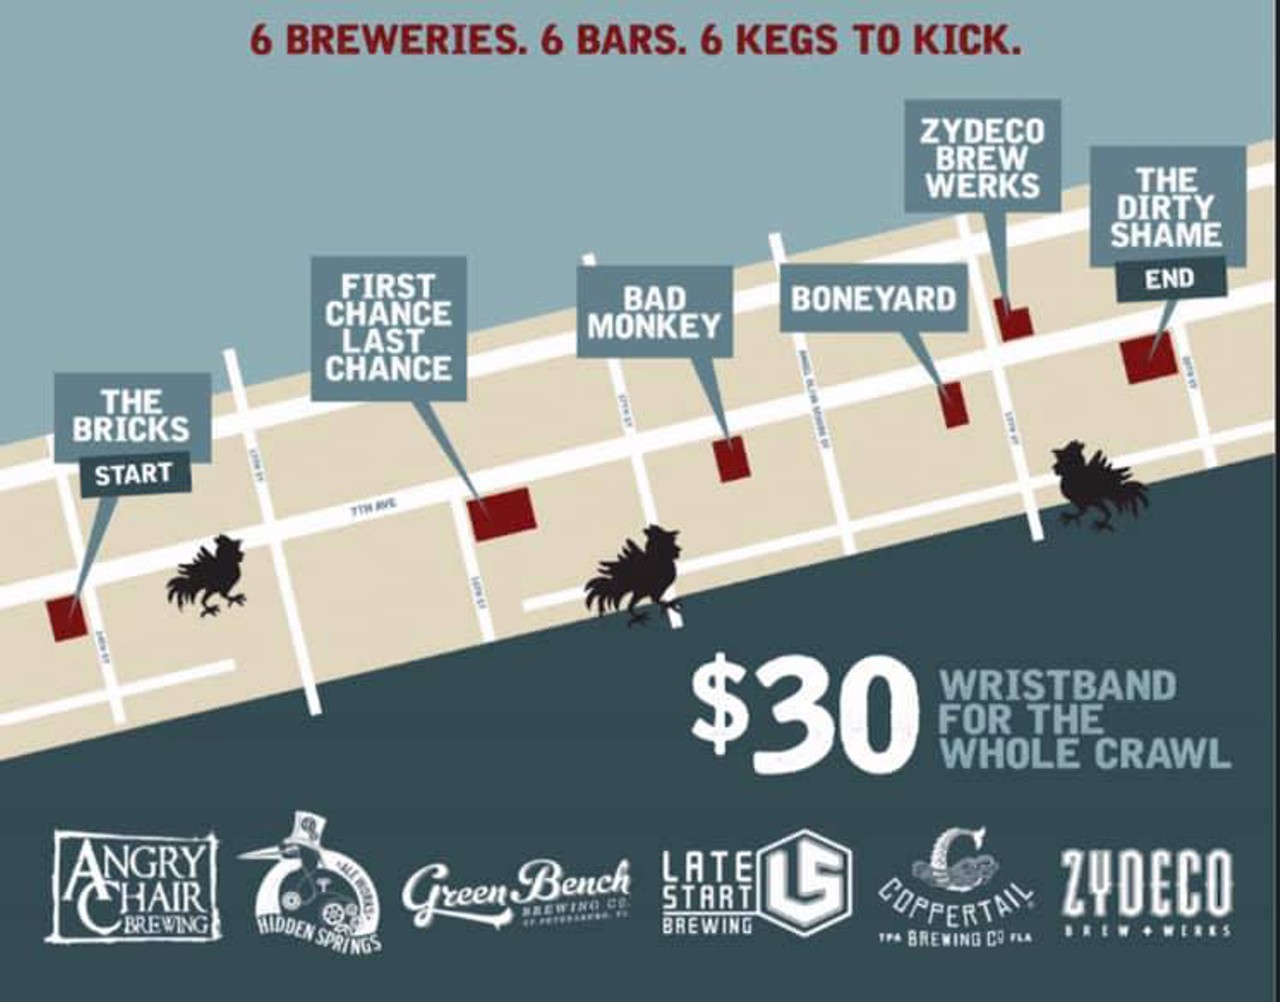 Kick the Keg Pub Crawl in Ybor CityMeet at The Bricks, then drink your way through Ybor City. With stops at First Chance Last Chance, Bad Monkey, Boneyard, Zydeco Brew Works and The Dirty Shame.Thurs., Mar. 7, 7-11 p.m.
Photo via the Facebook event page